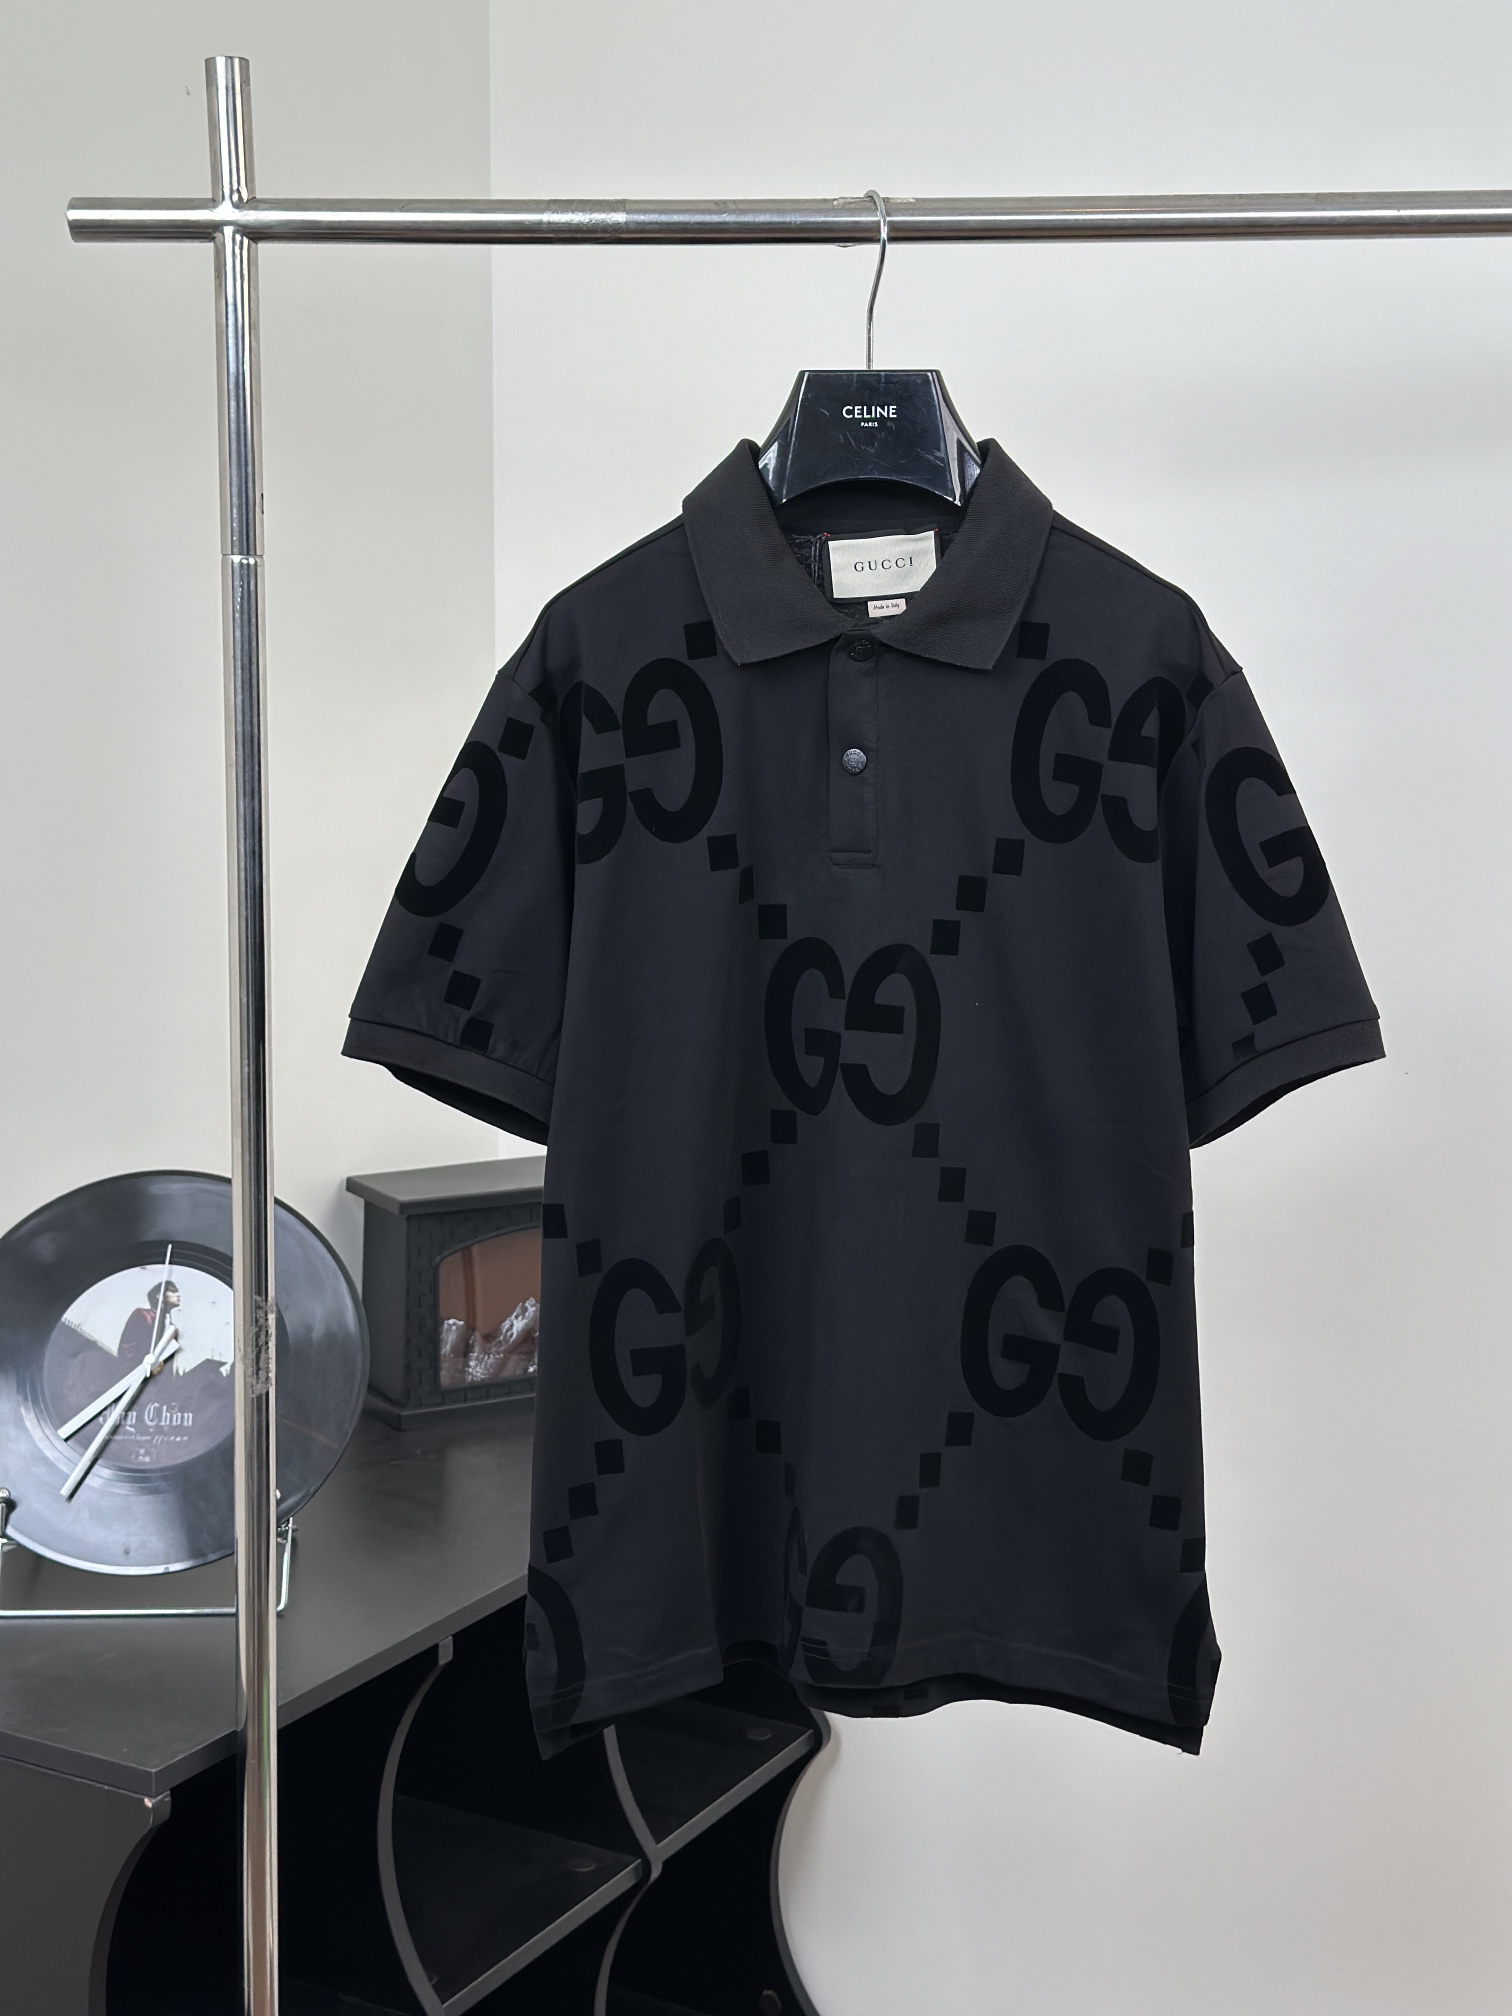 Cheap Replica
 Gucci Clothing Polo Black Printing Cotton Knitted Knitting